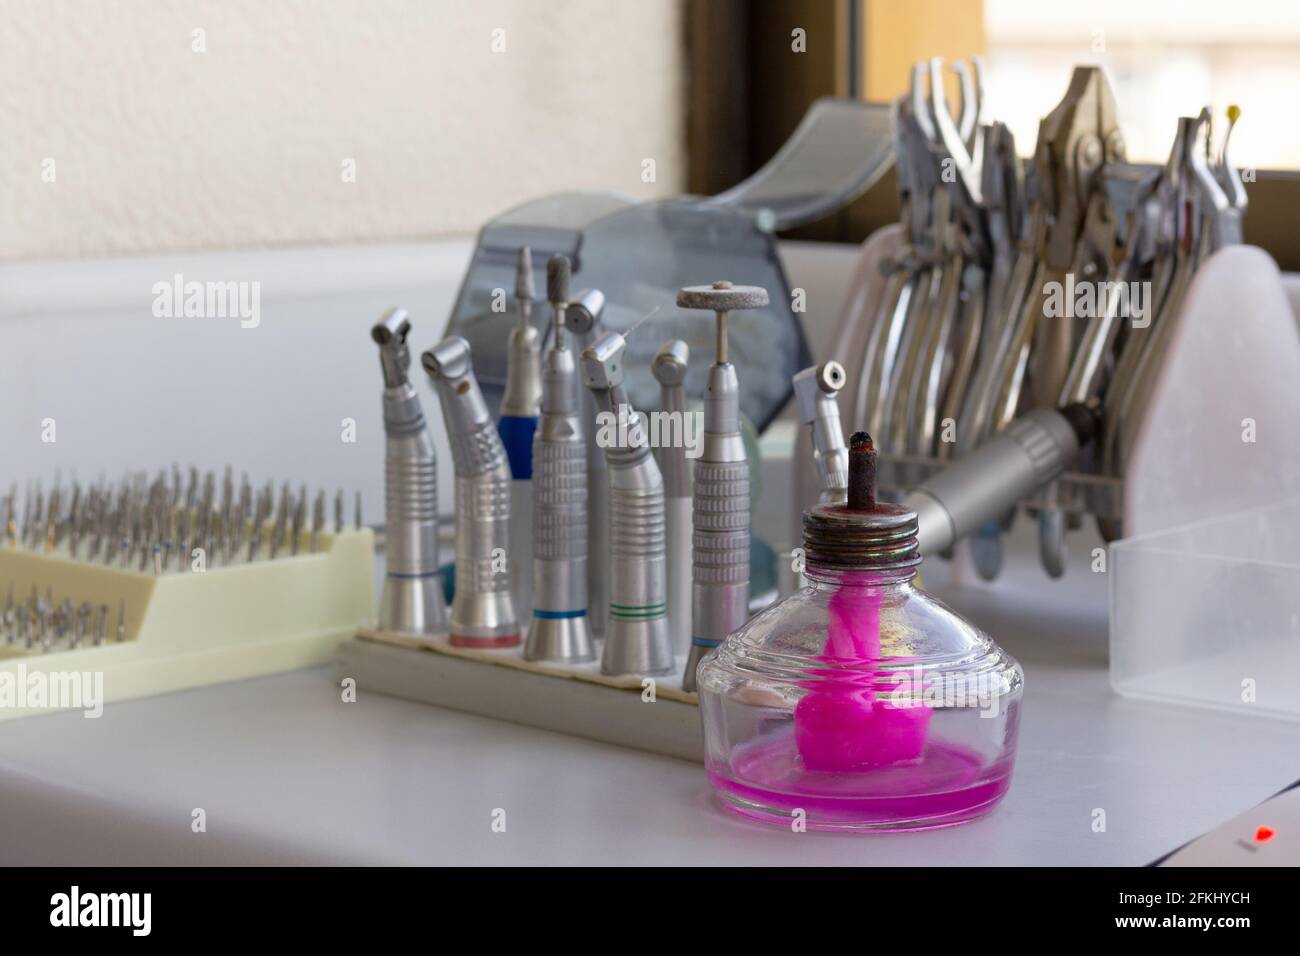 Dental clinic equipment with pink smell diffuser on table. Dentist tools concept Stock Photo